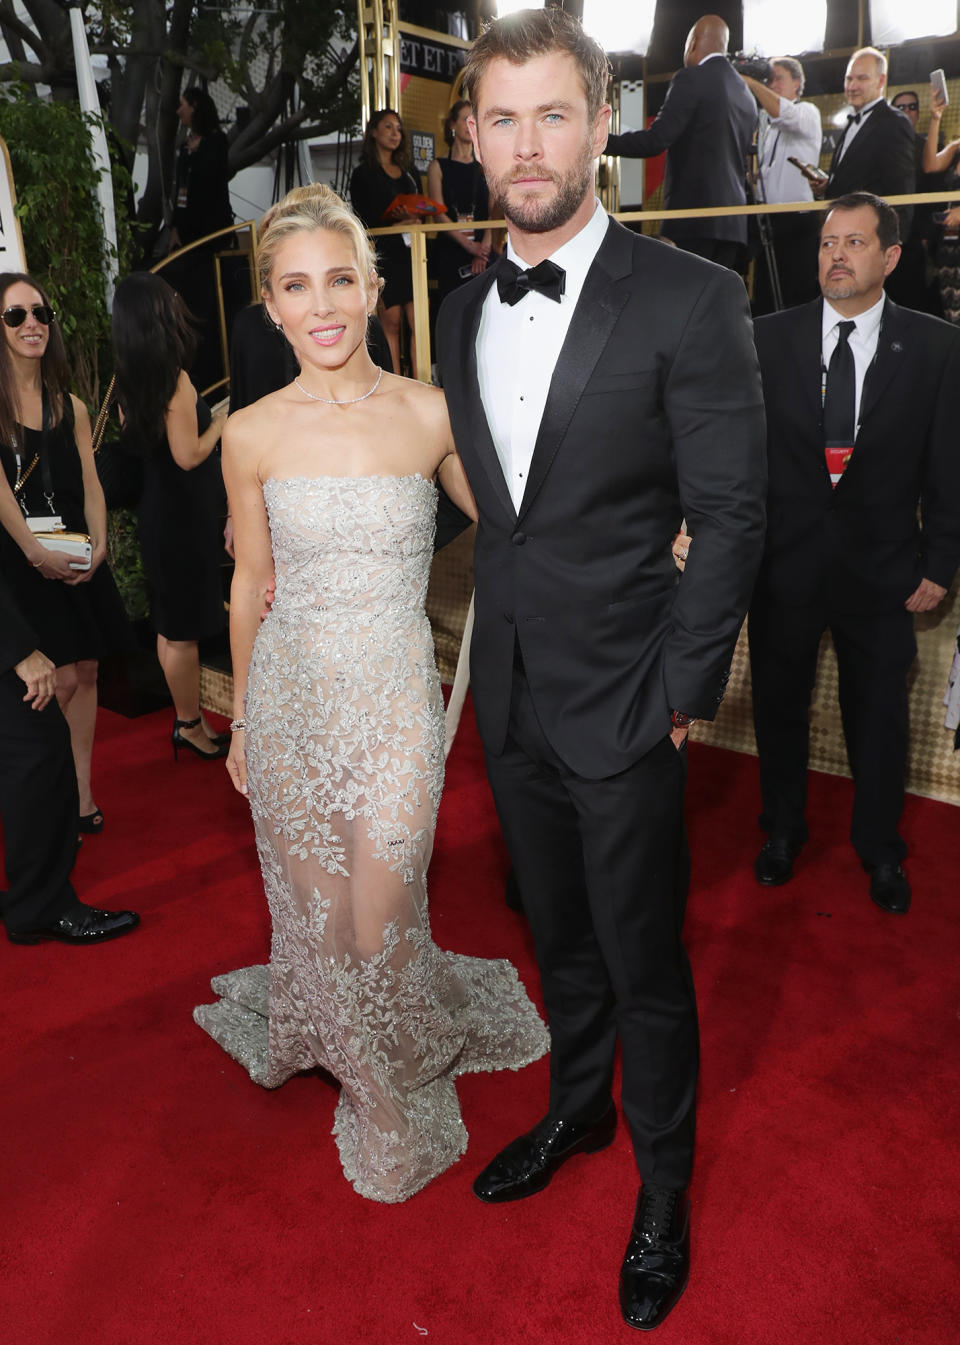 <p><b>"My wife and I fell in love, had kids, didn't really see each other for a few years, then fell back in love."</b> — Chris Hemsworth, on <span>how his career put a strain on his and wife Elsa Pataky's marriage</span>, to <i>GQ Australia</i></p>